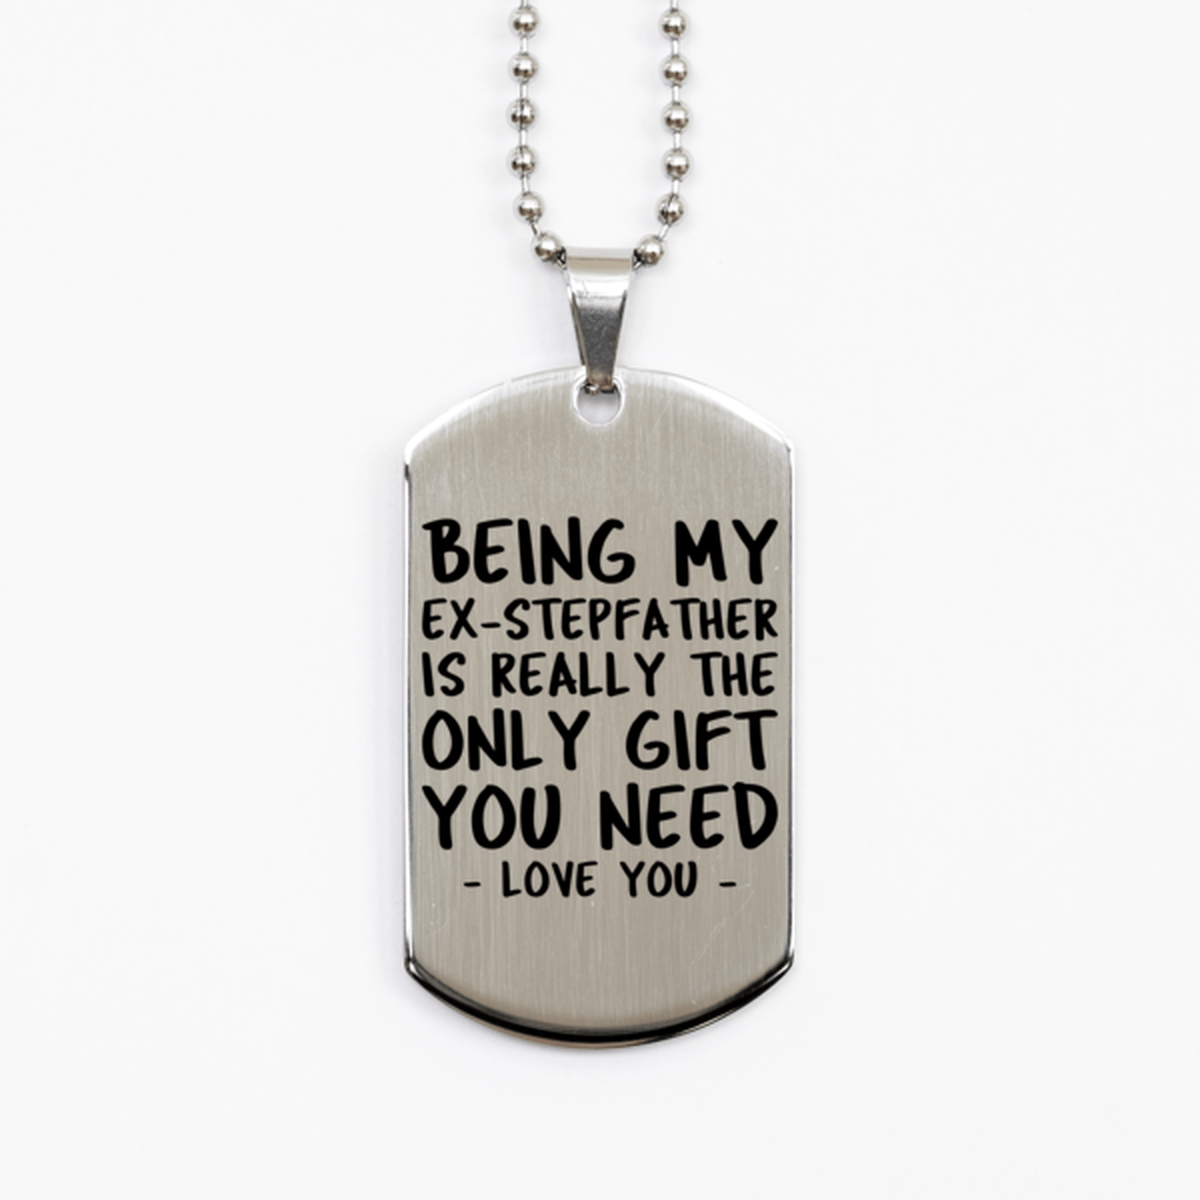 Funny Ex-stepfather Silver Dog Tag Necklace, Being My Ex-stepfather Is Really the Only Gift You Need, Best Birthday Gifts for Ex-stepfather